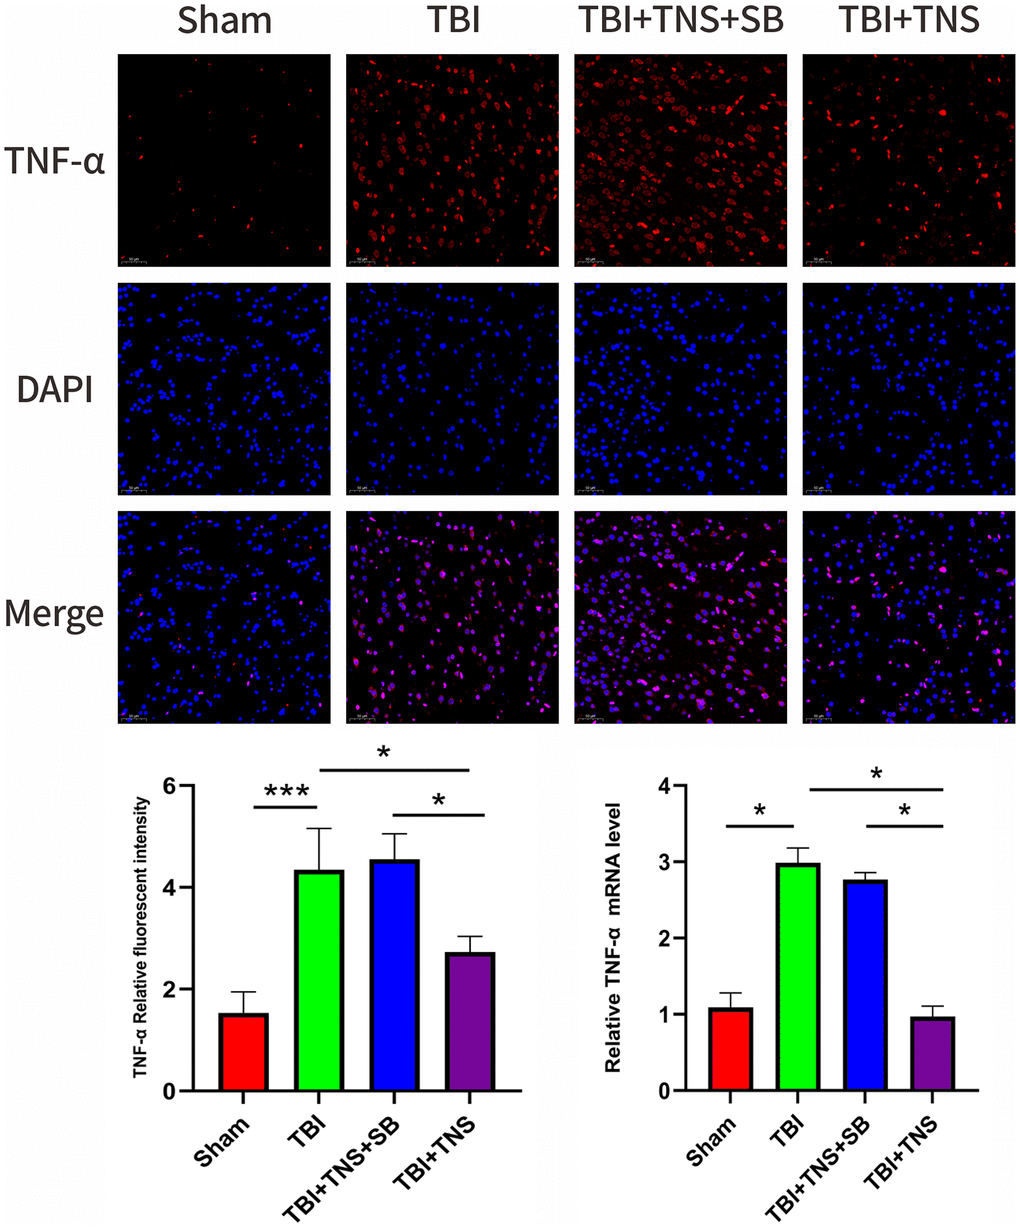 Trigeminal nerve electrical stimulation (TNS) decreases tumor necrosis factor (TNF)-α levels after traumatic brain injury (TBI) via orexin-A (OX-A)/orexin receptor 1 (OX1R). Representative immunofluorescence staining and relative mRNA levels of TNF-α. Results are expressed as mean ± standard deviation (SD; *P **P ***P 